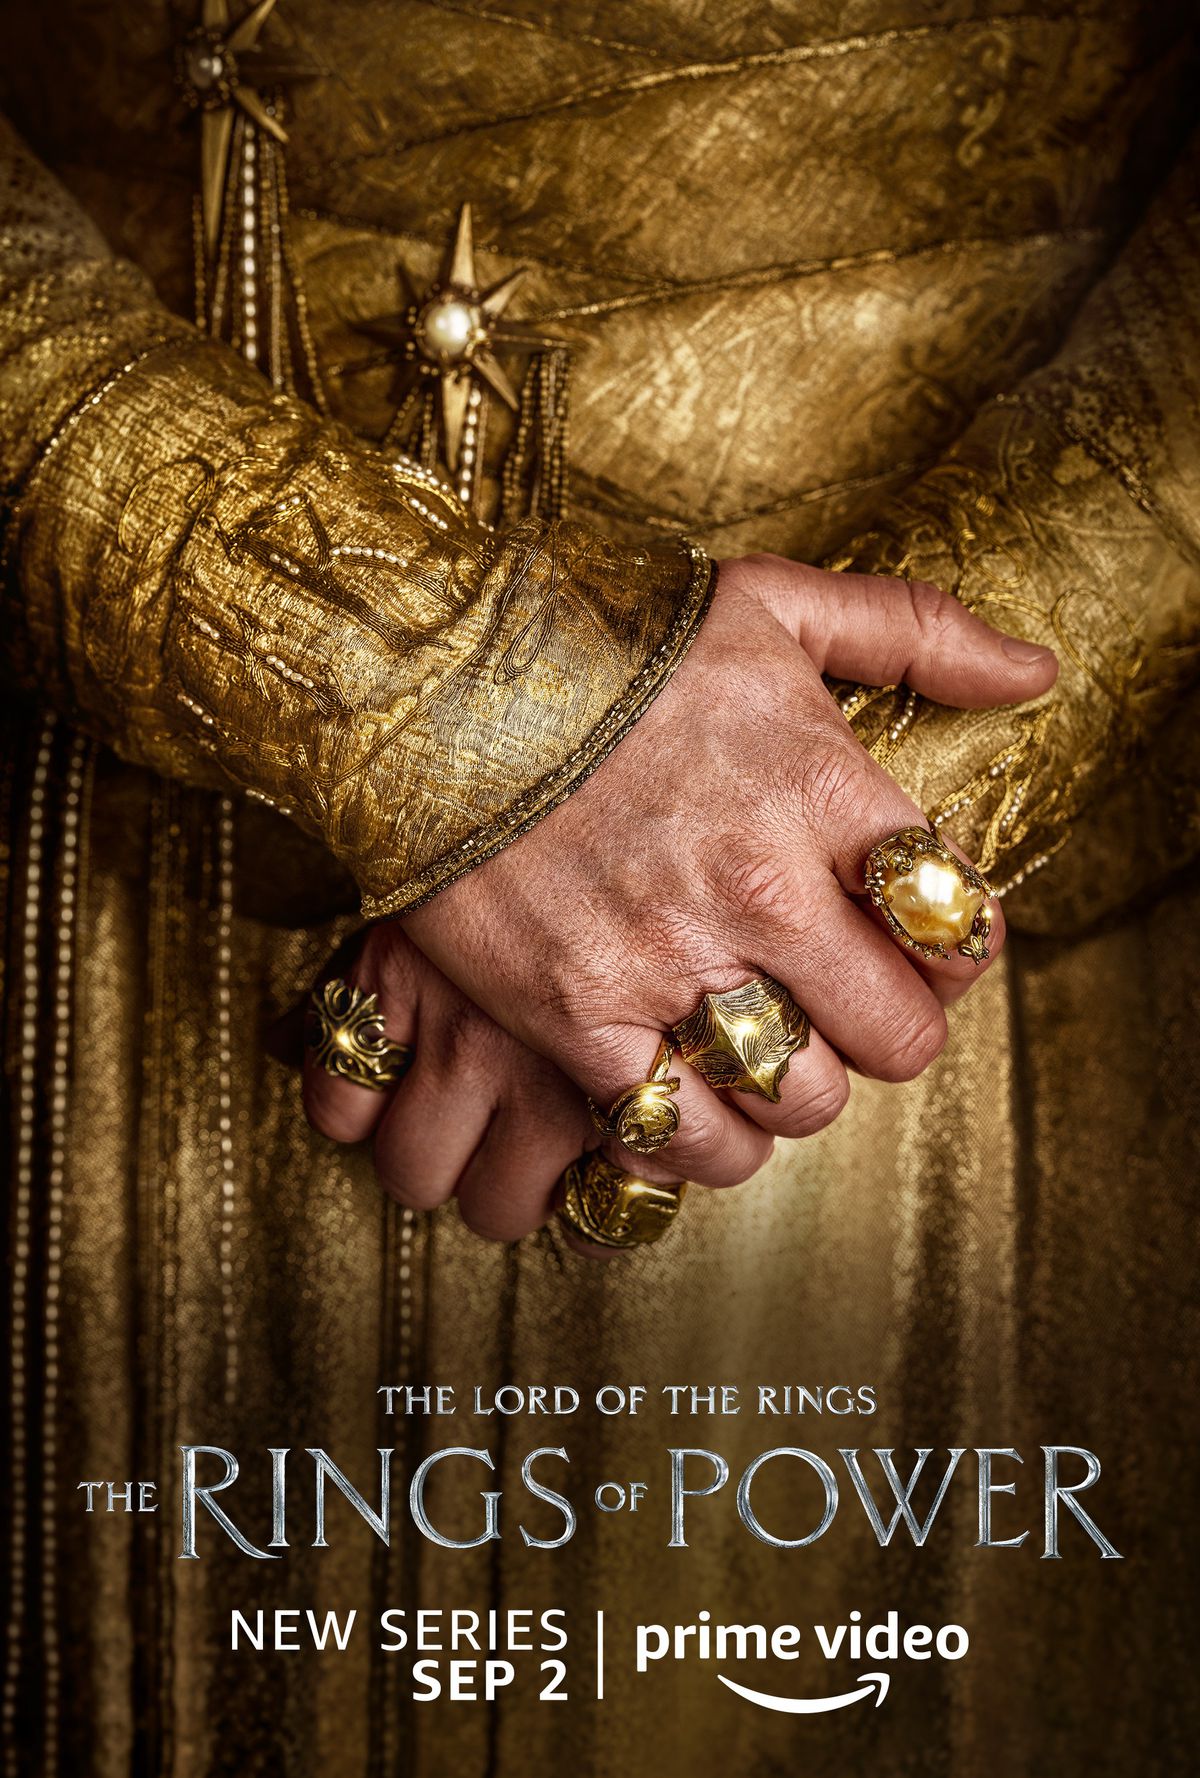 Lord of the Rings: The Rings of Power gets mysterious character posters